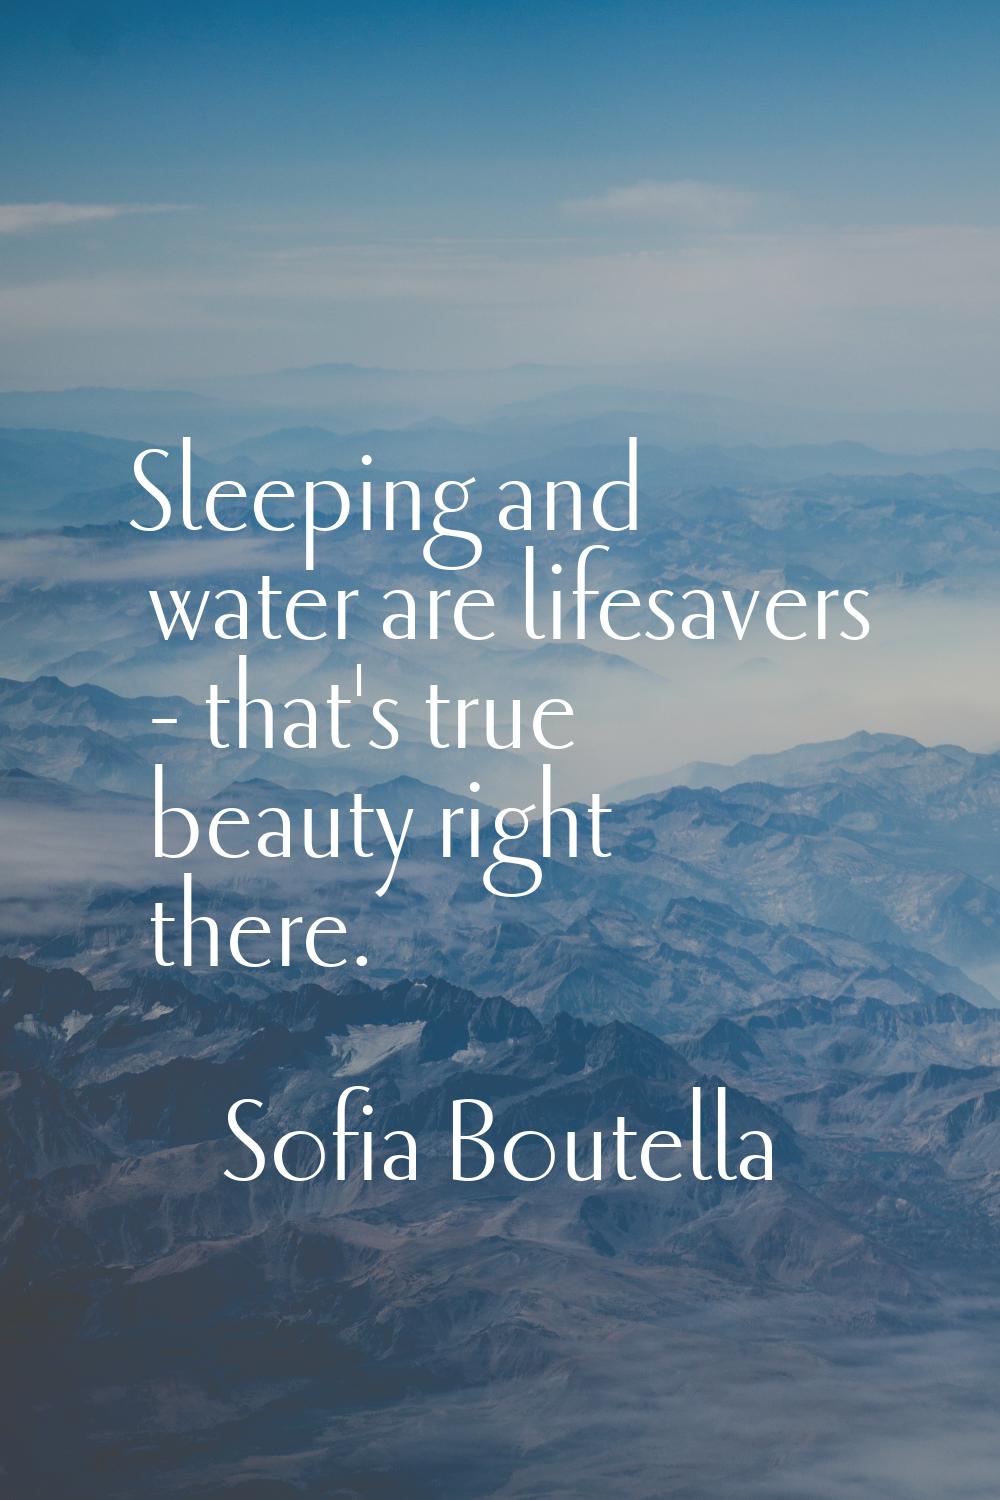 Sleeping and water are lifesavers - that's true beauty right there.